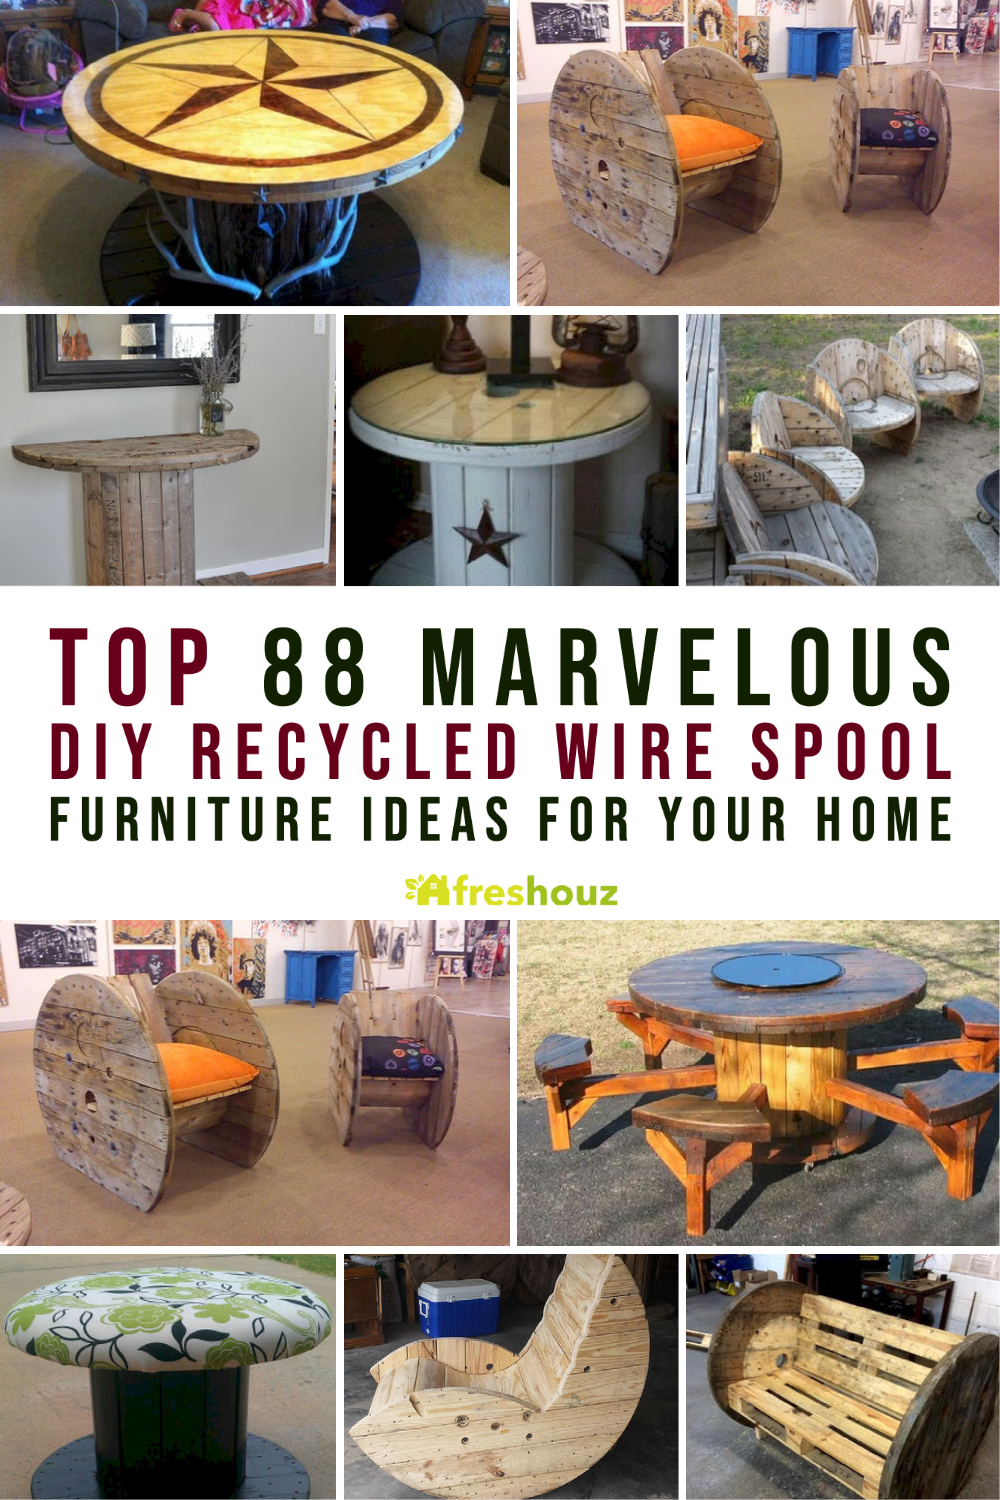 Top 88 Marvelous DIY Recycled Wire Spool Furniture Ideas For Your Home